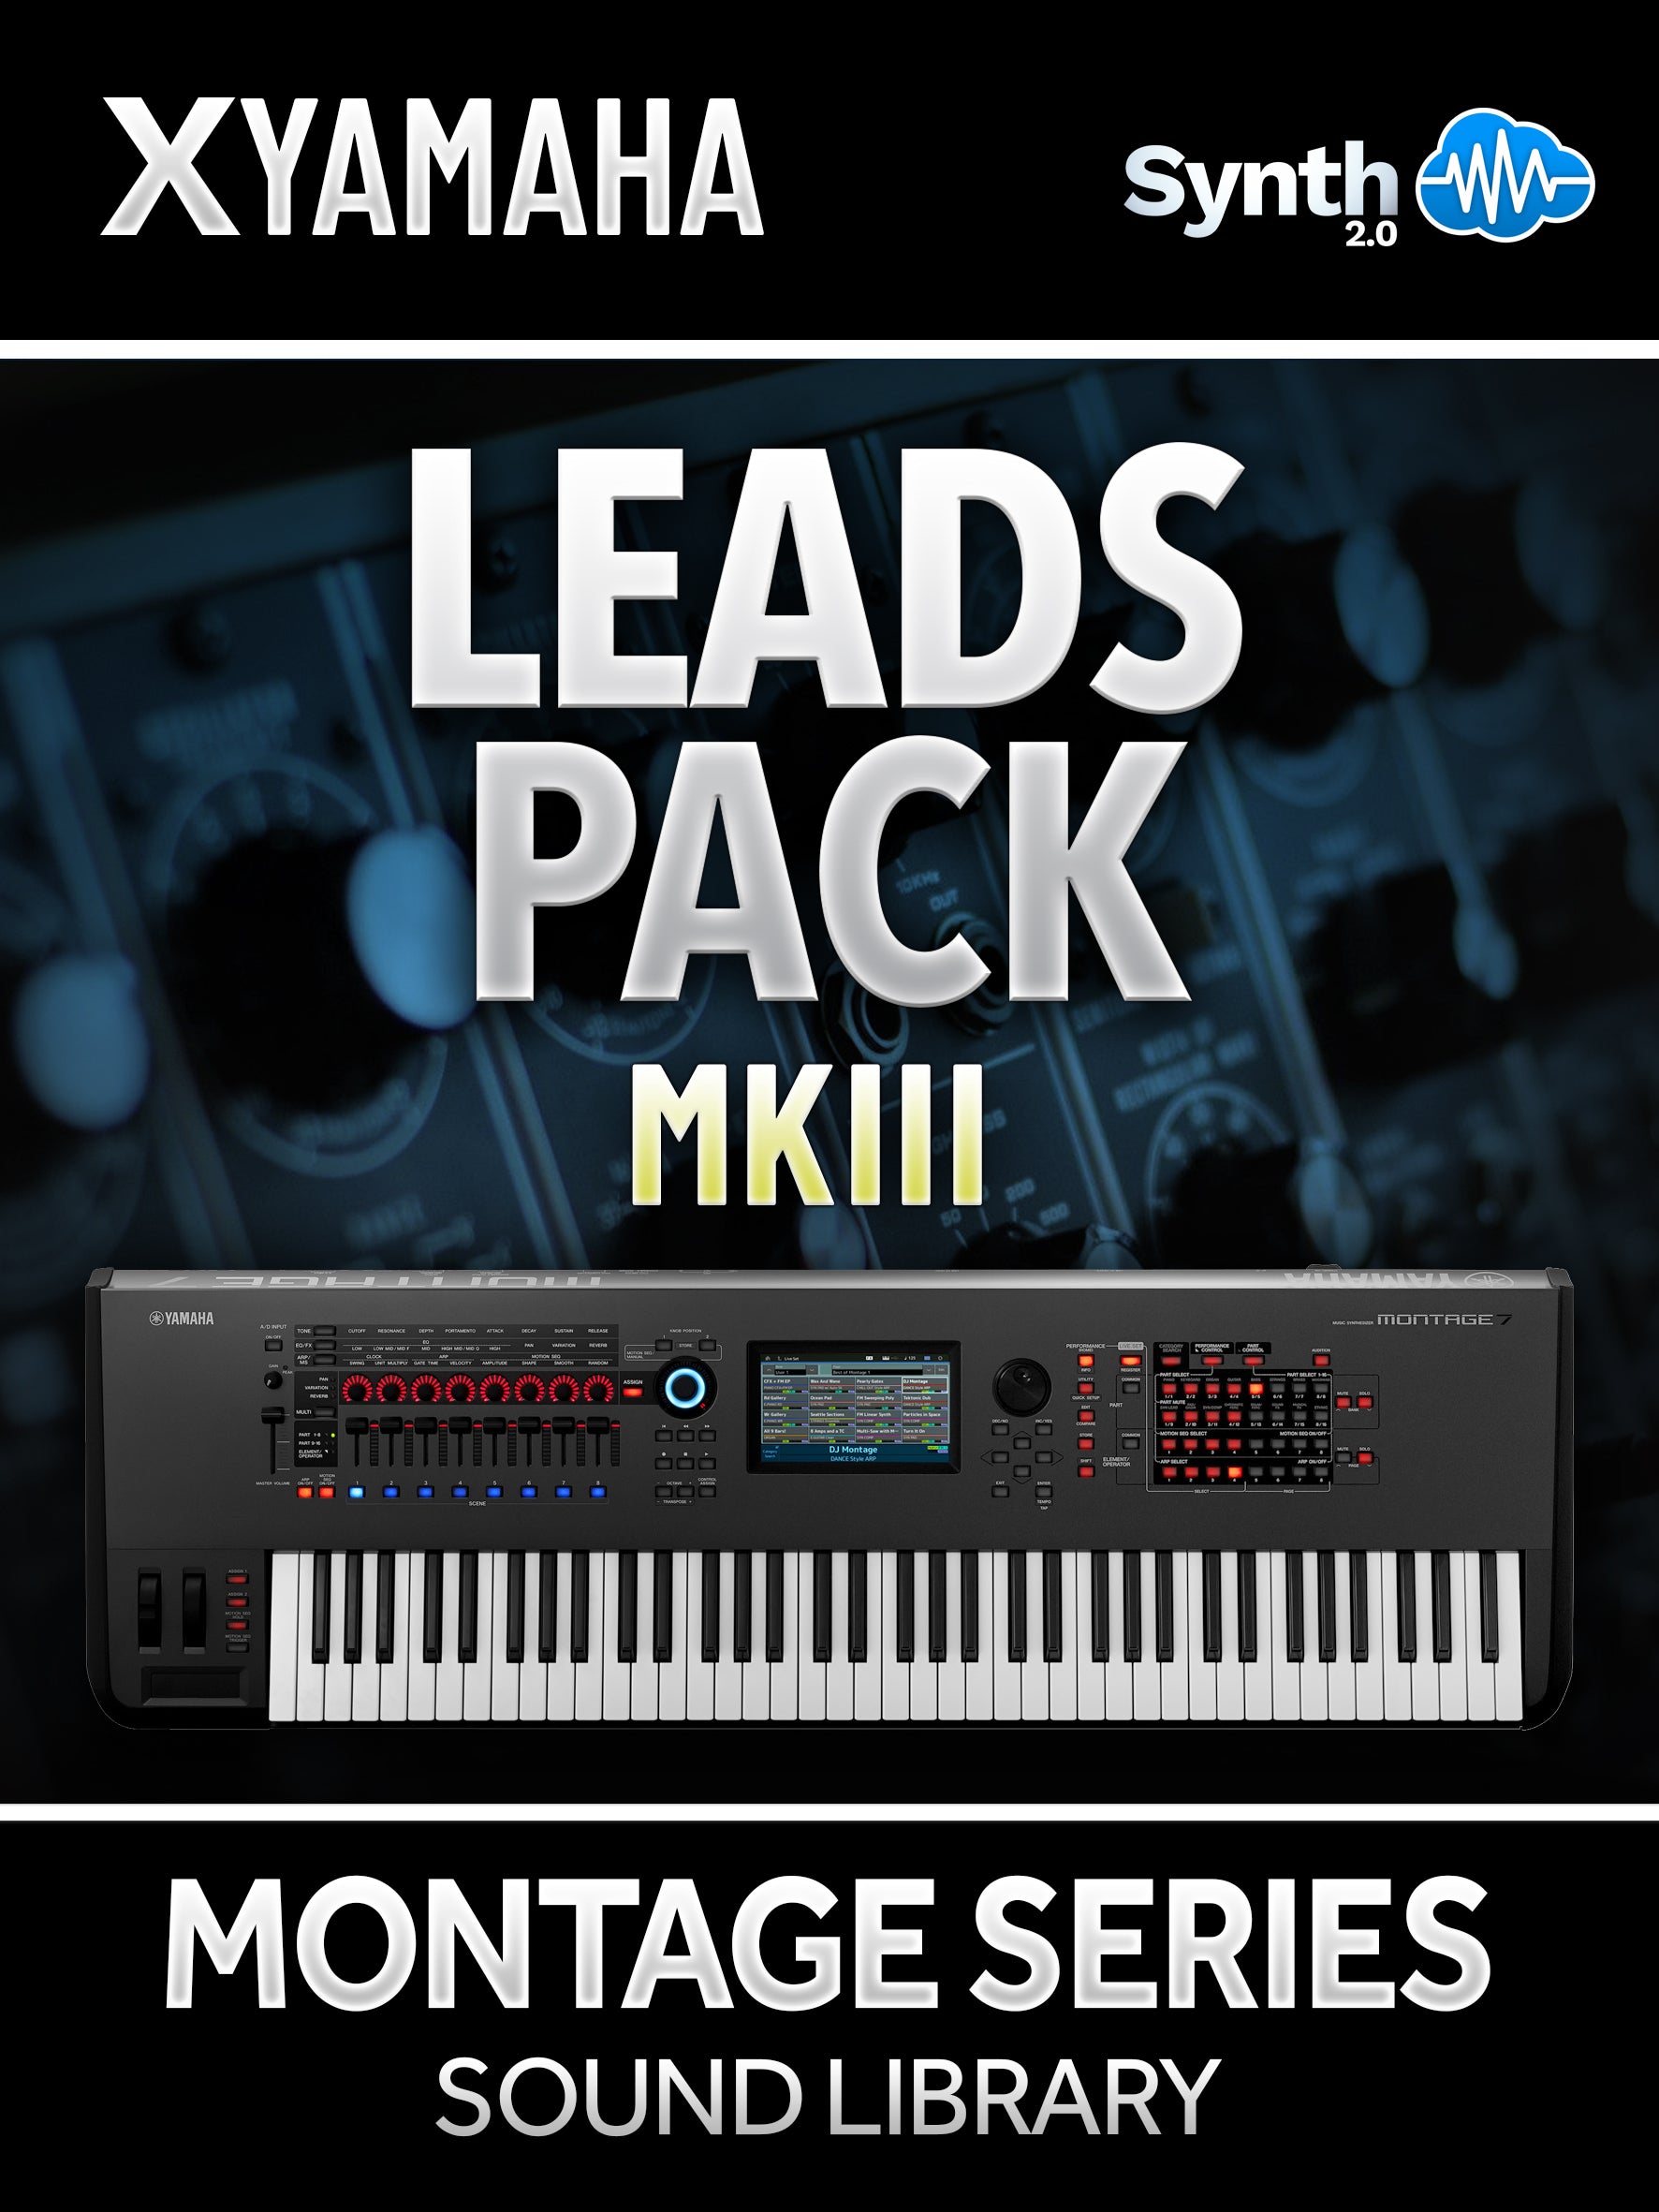 LDX125 - Leads Pack MKIII - Yamaha MONTAGE / M ( 34 presets )